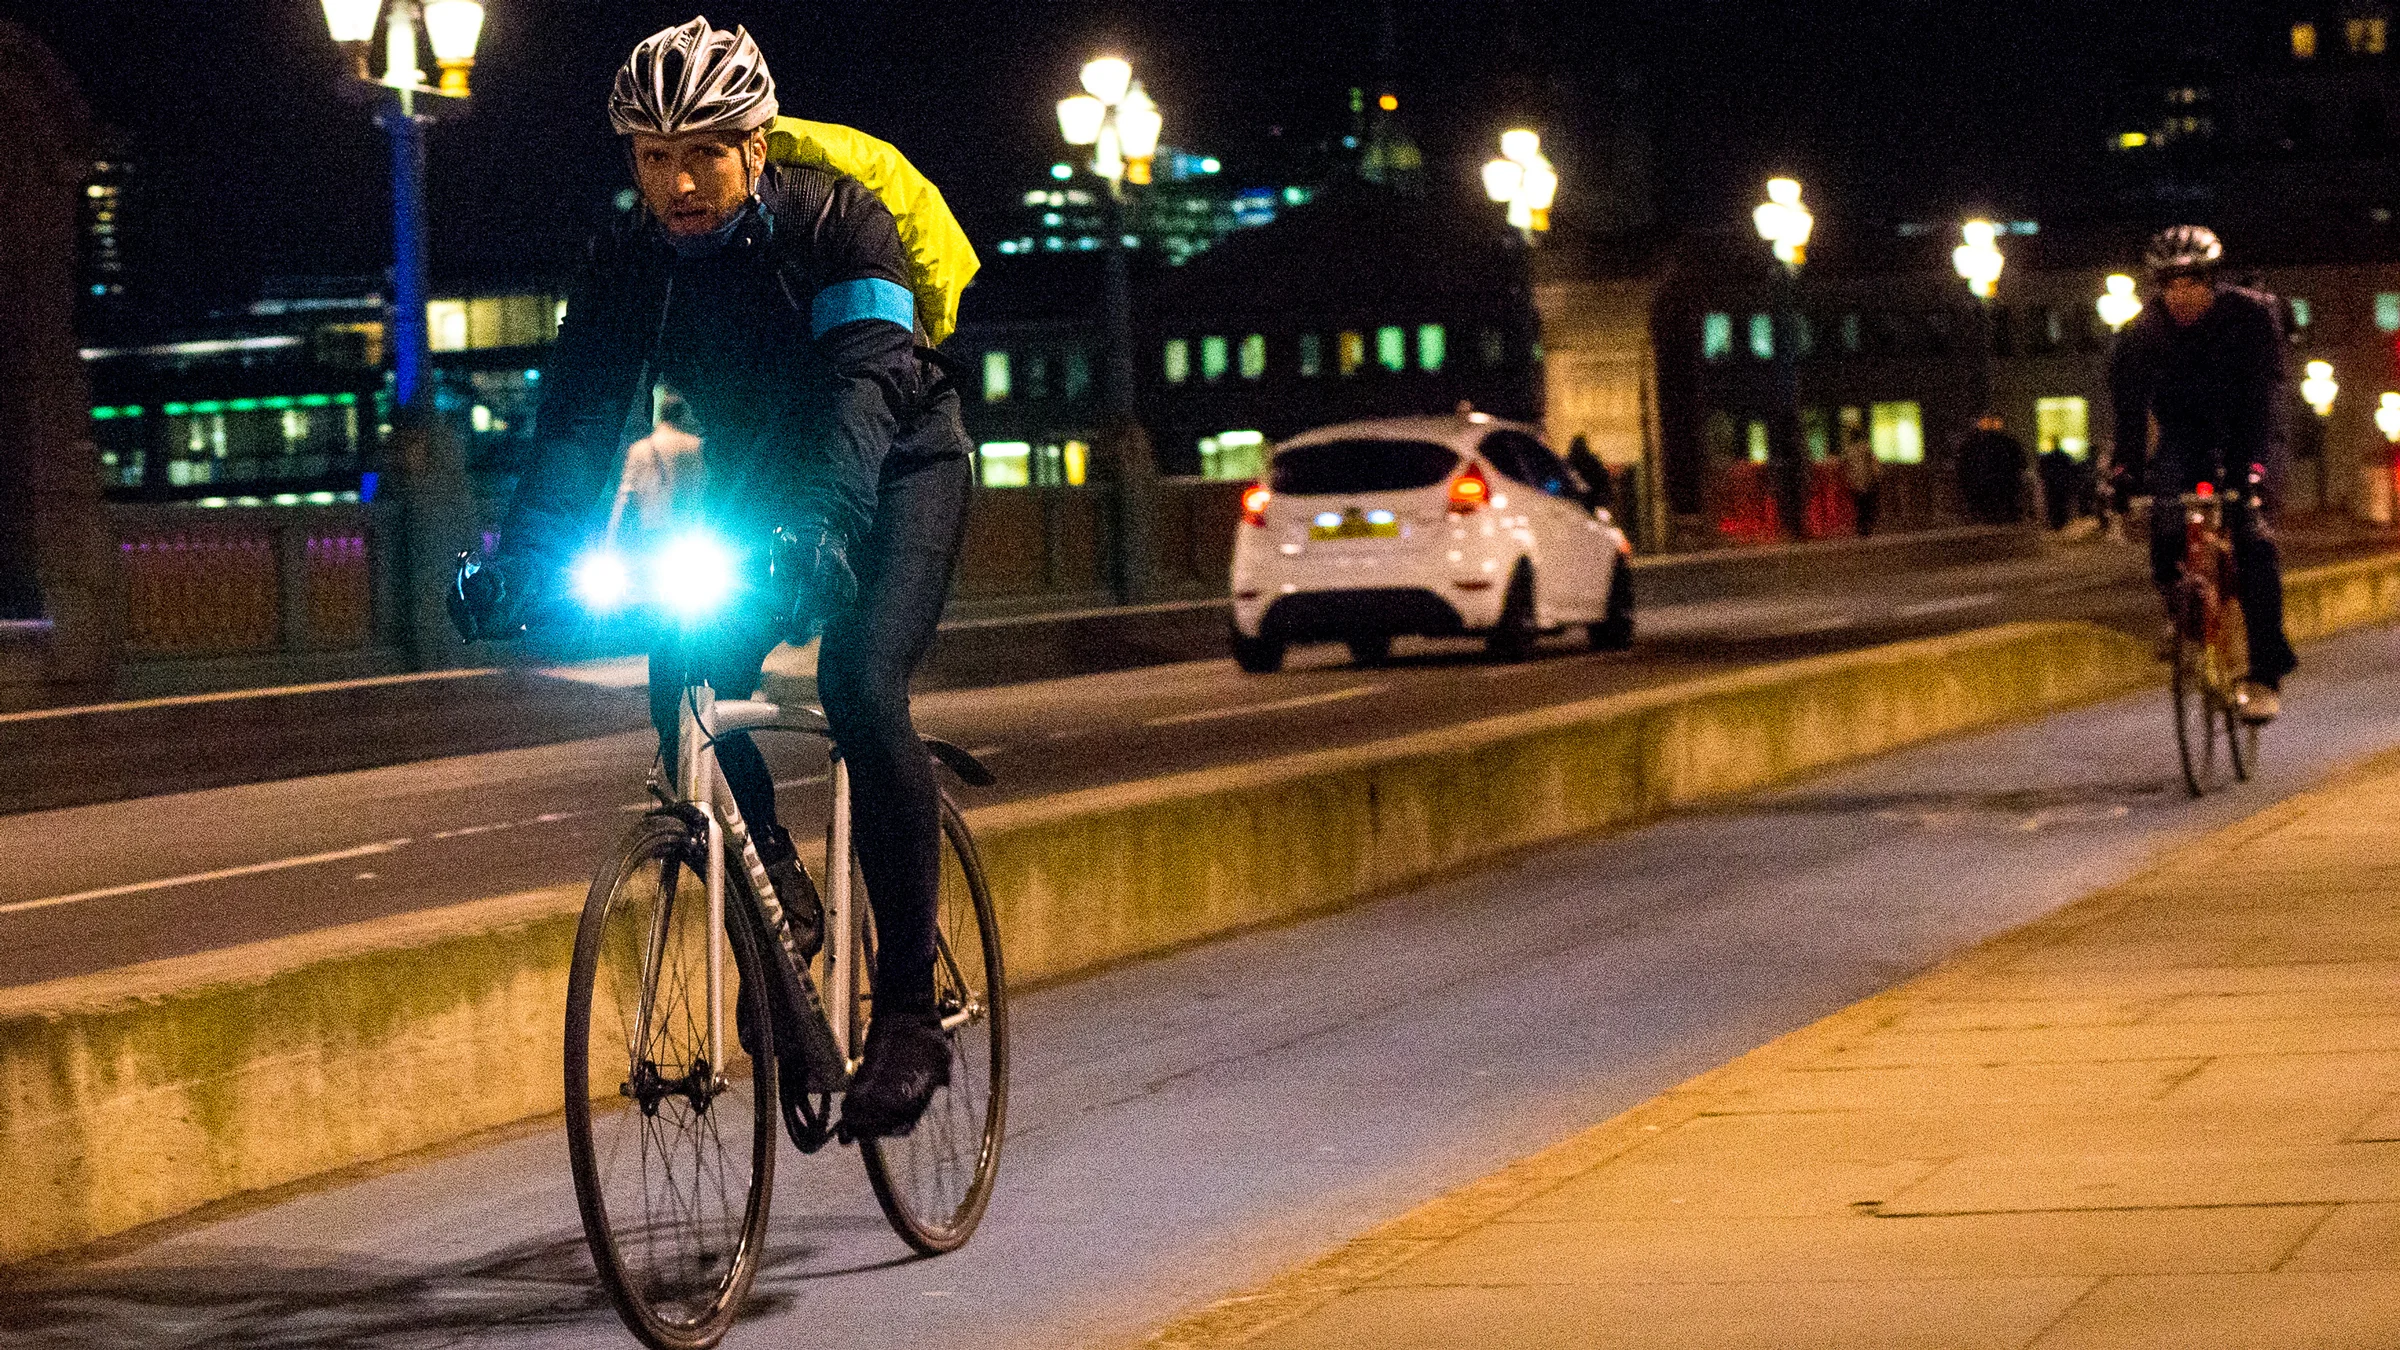 Ride bikes at night with lights